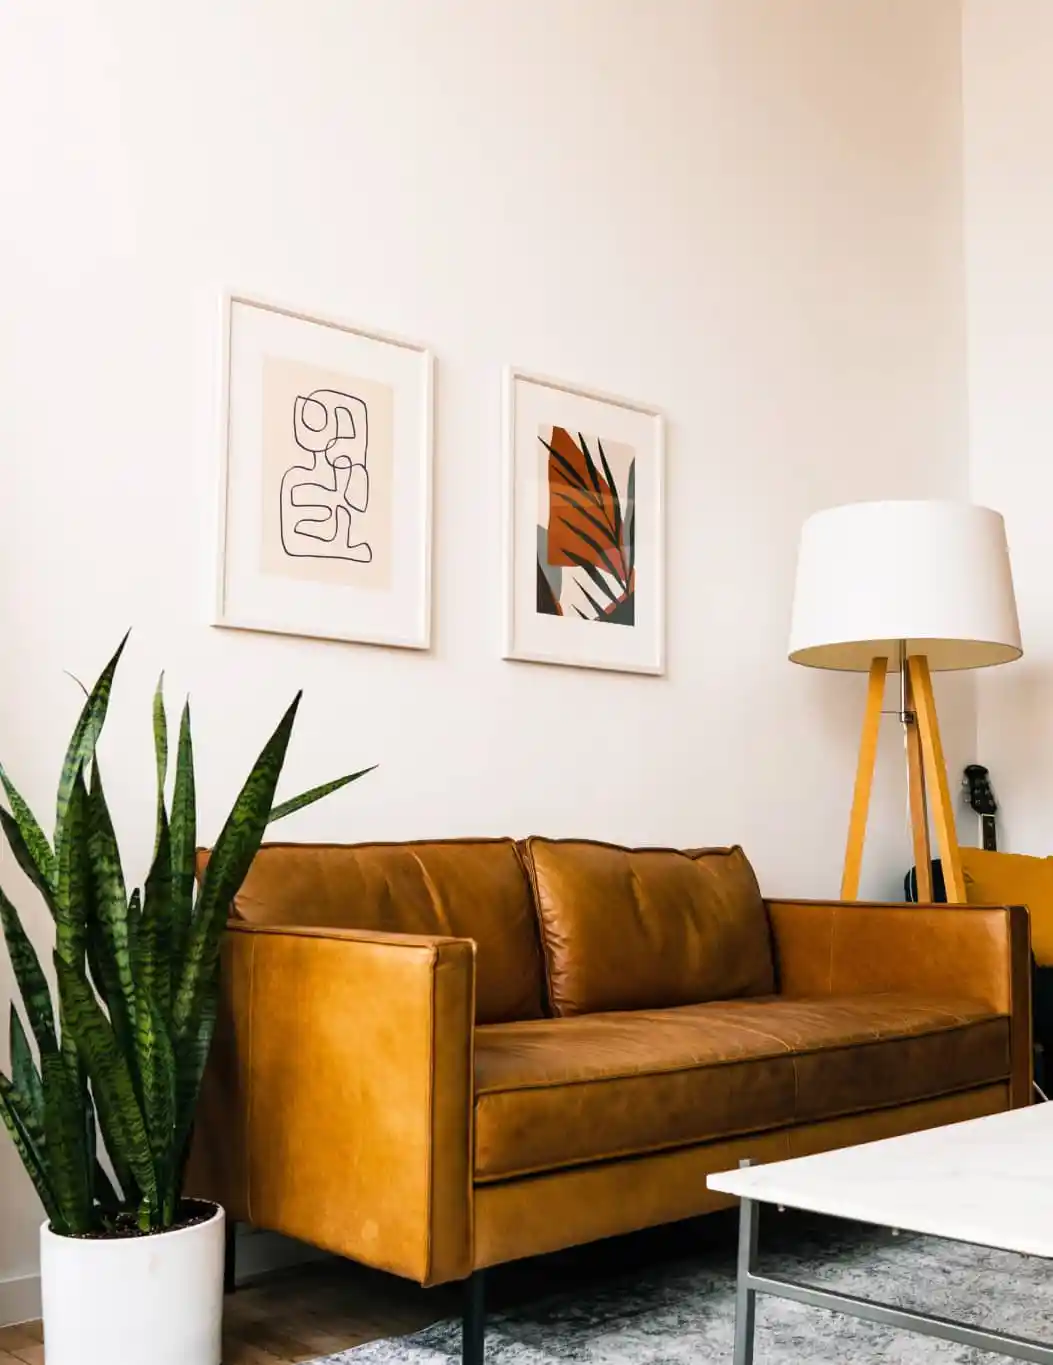 Light brown leather couch, standing lamp, indoor plant, and framed artwork on a white wall.